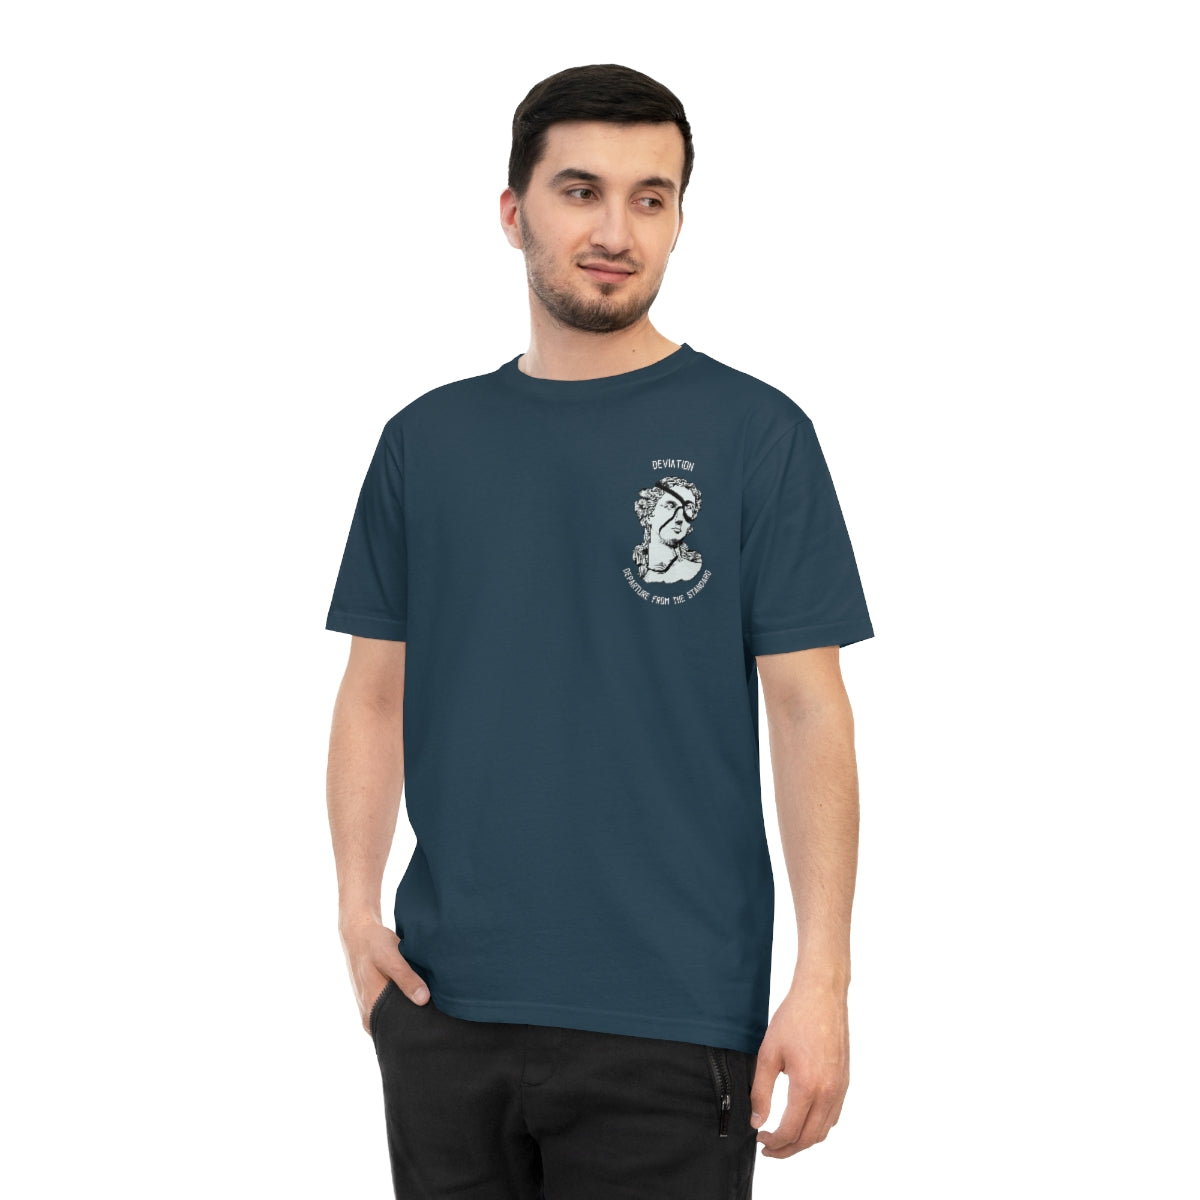 Departure From The Standard T-Shirt